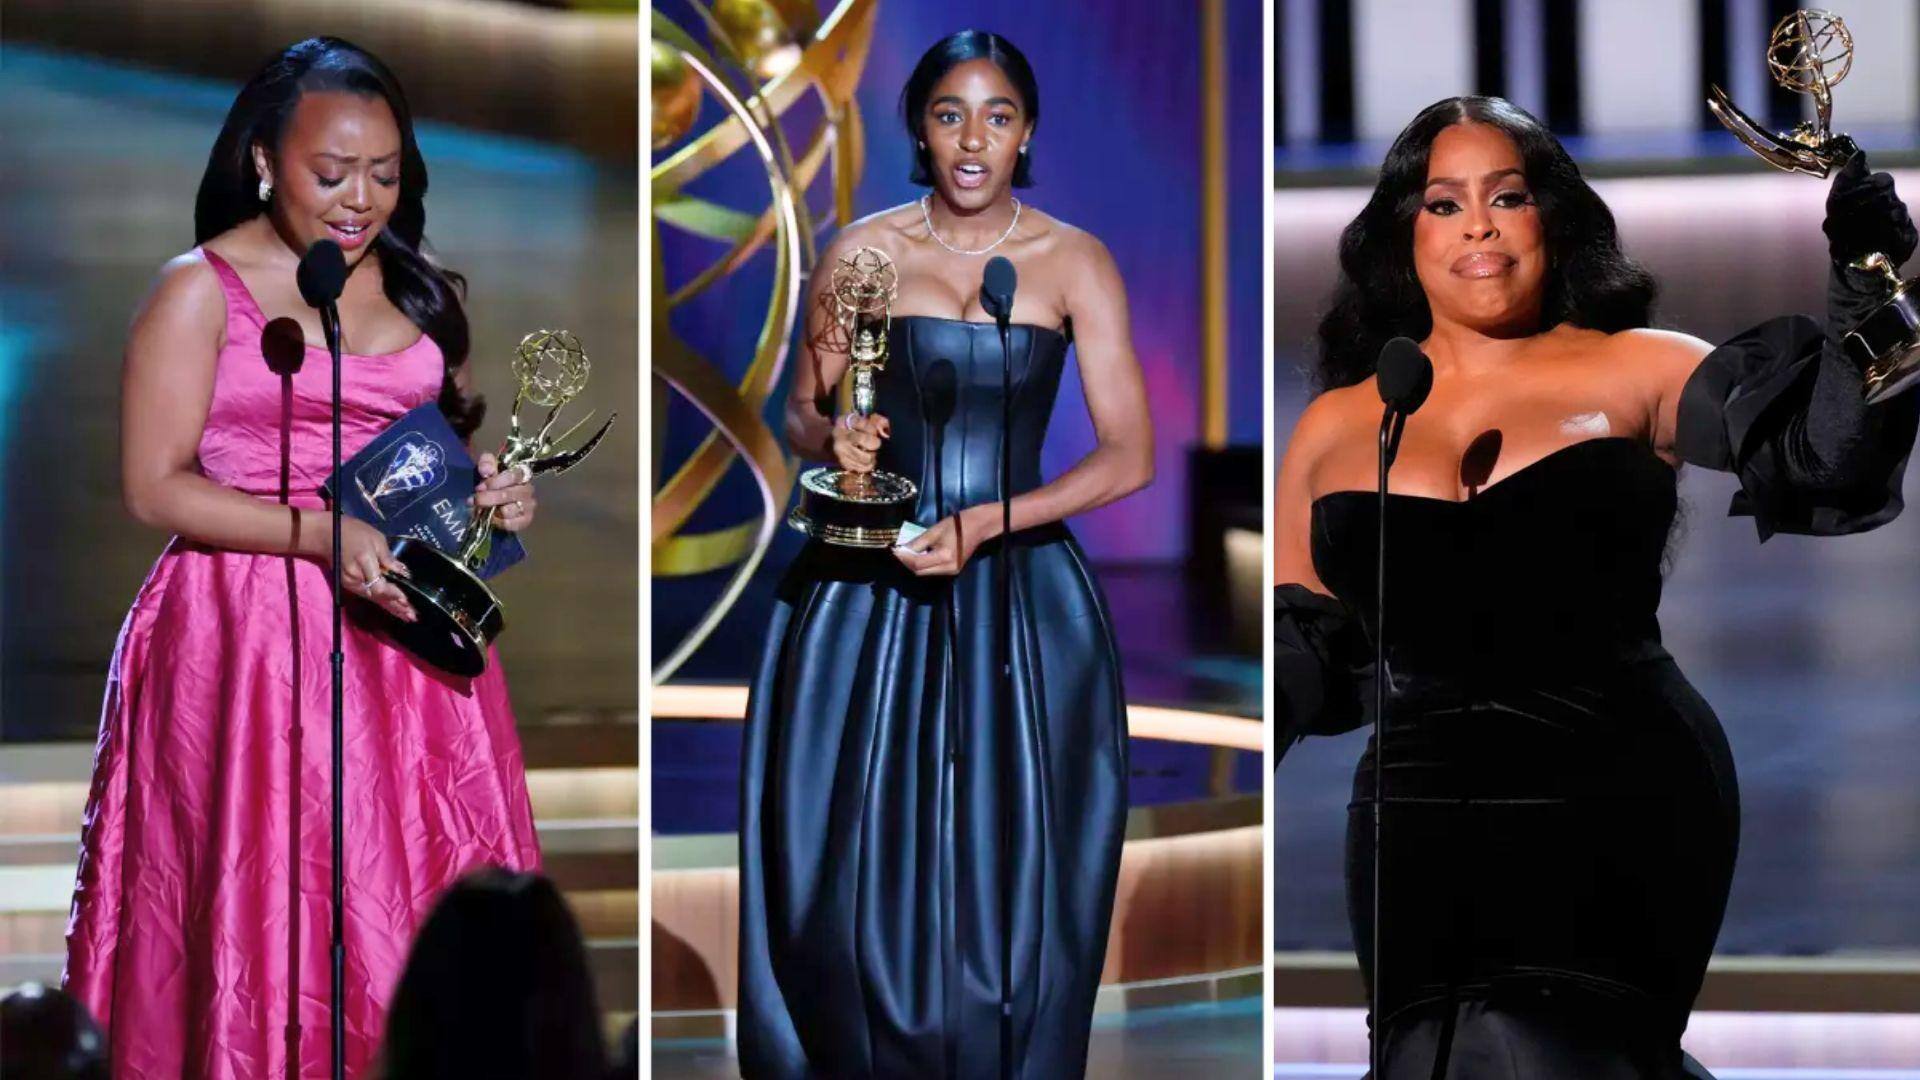 Emmys: Most actors of color picked up trophies this year 